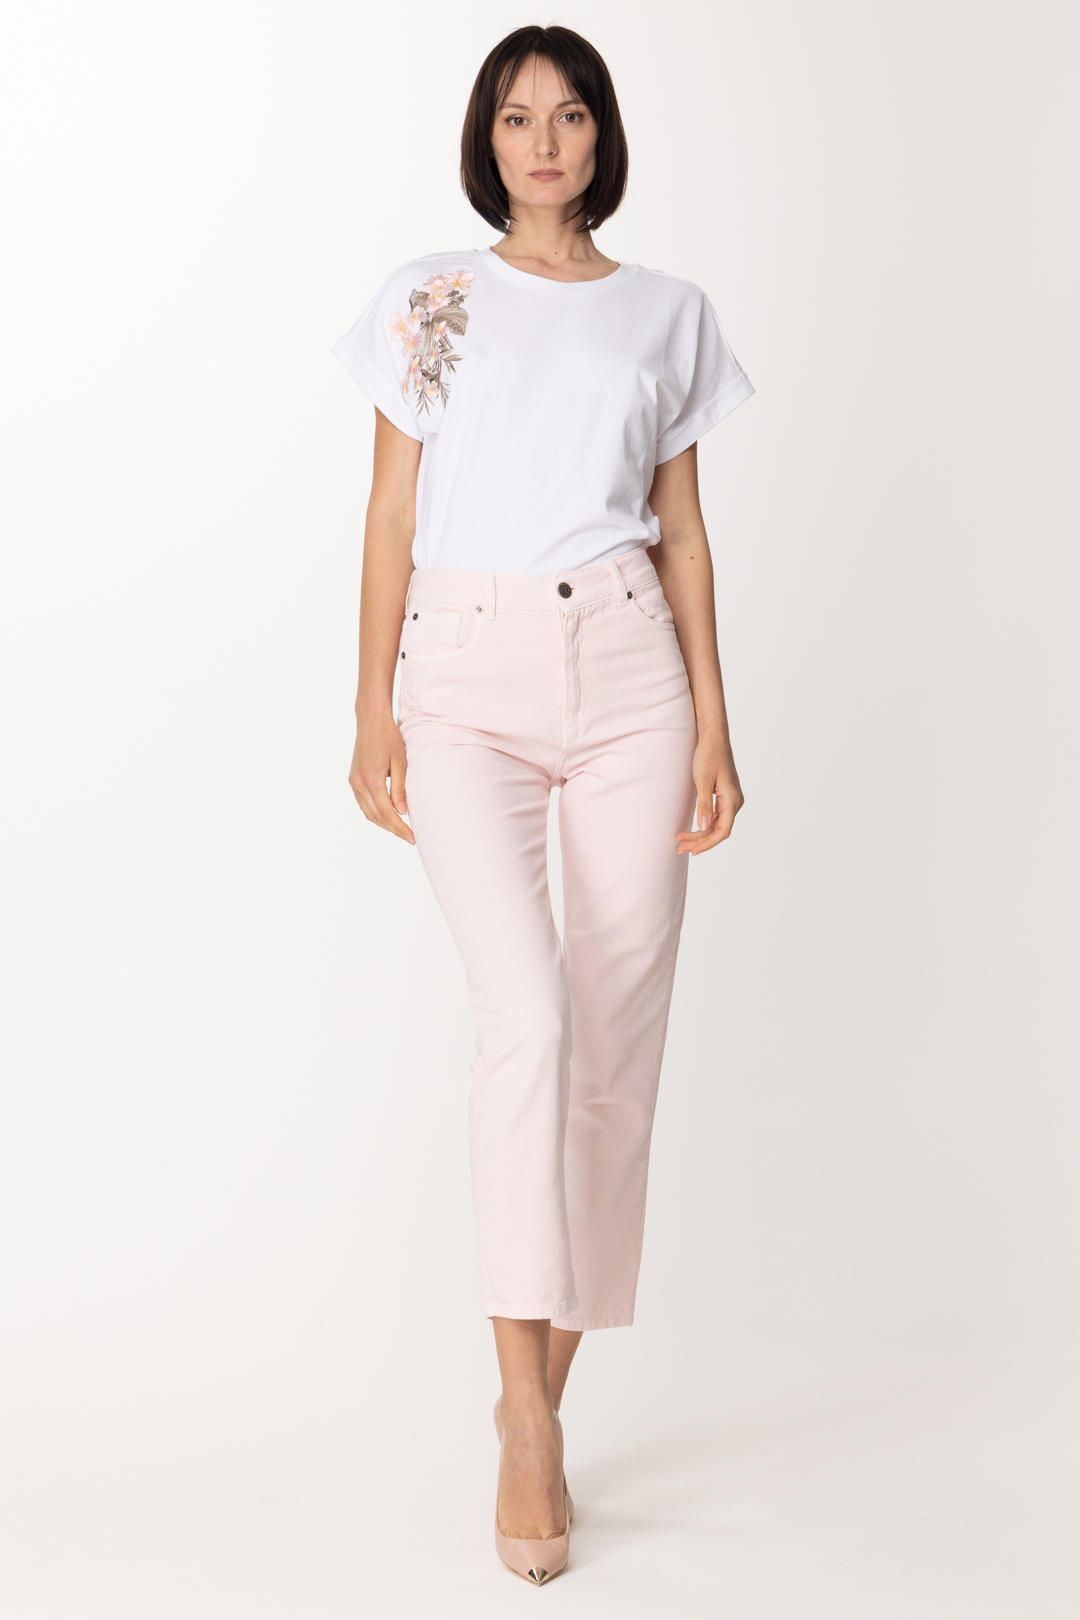 Preview: Twin-Set T-shirt with floral embroidery BIANCO OTTICO